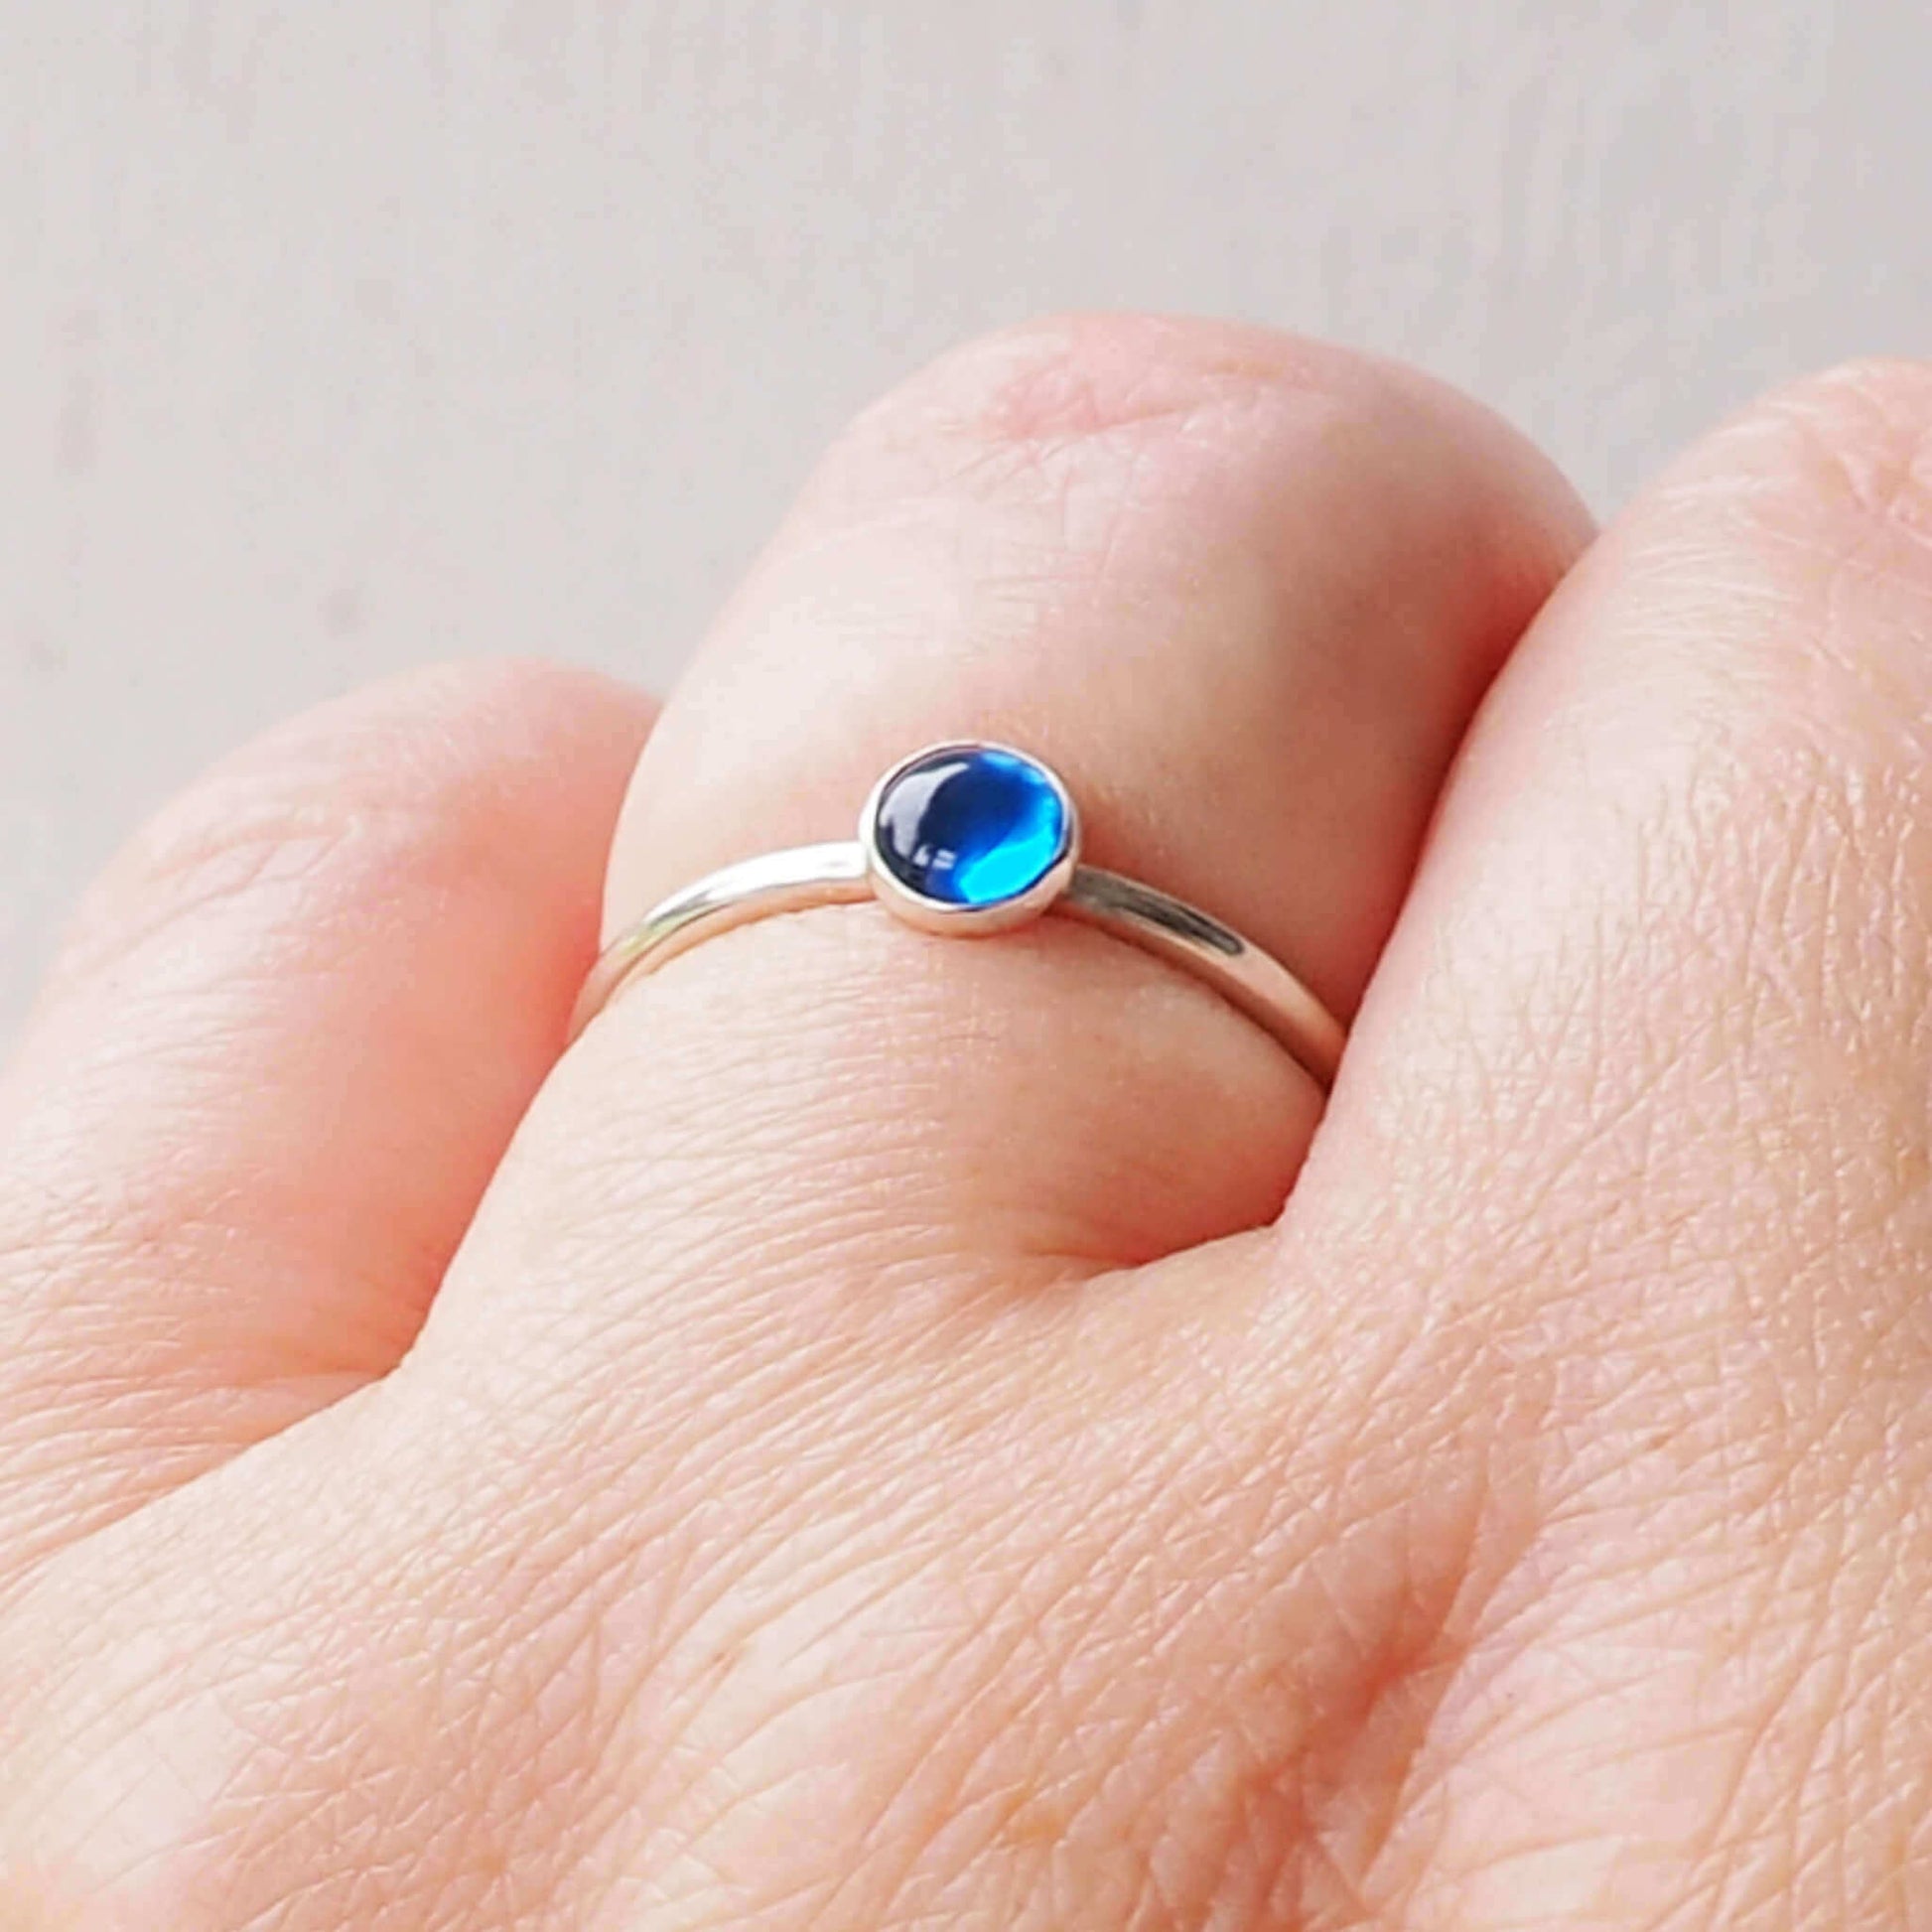 Silver Ring with a round gemstone in a simple style. The gem is a 5mm round lab sapphire cabochon in a bright primary blue. It's worn on a hand to show scale. Handmade by maram jewellery in Scotland